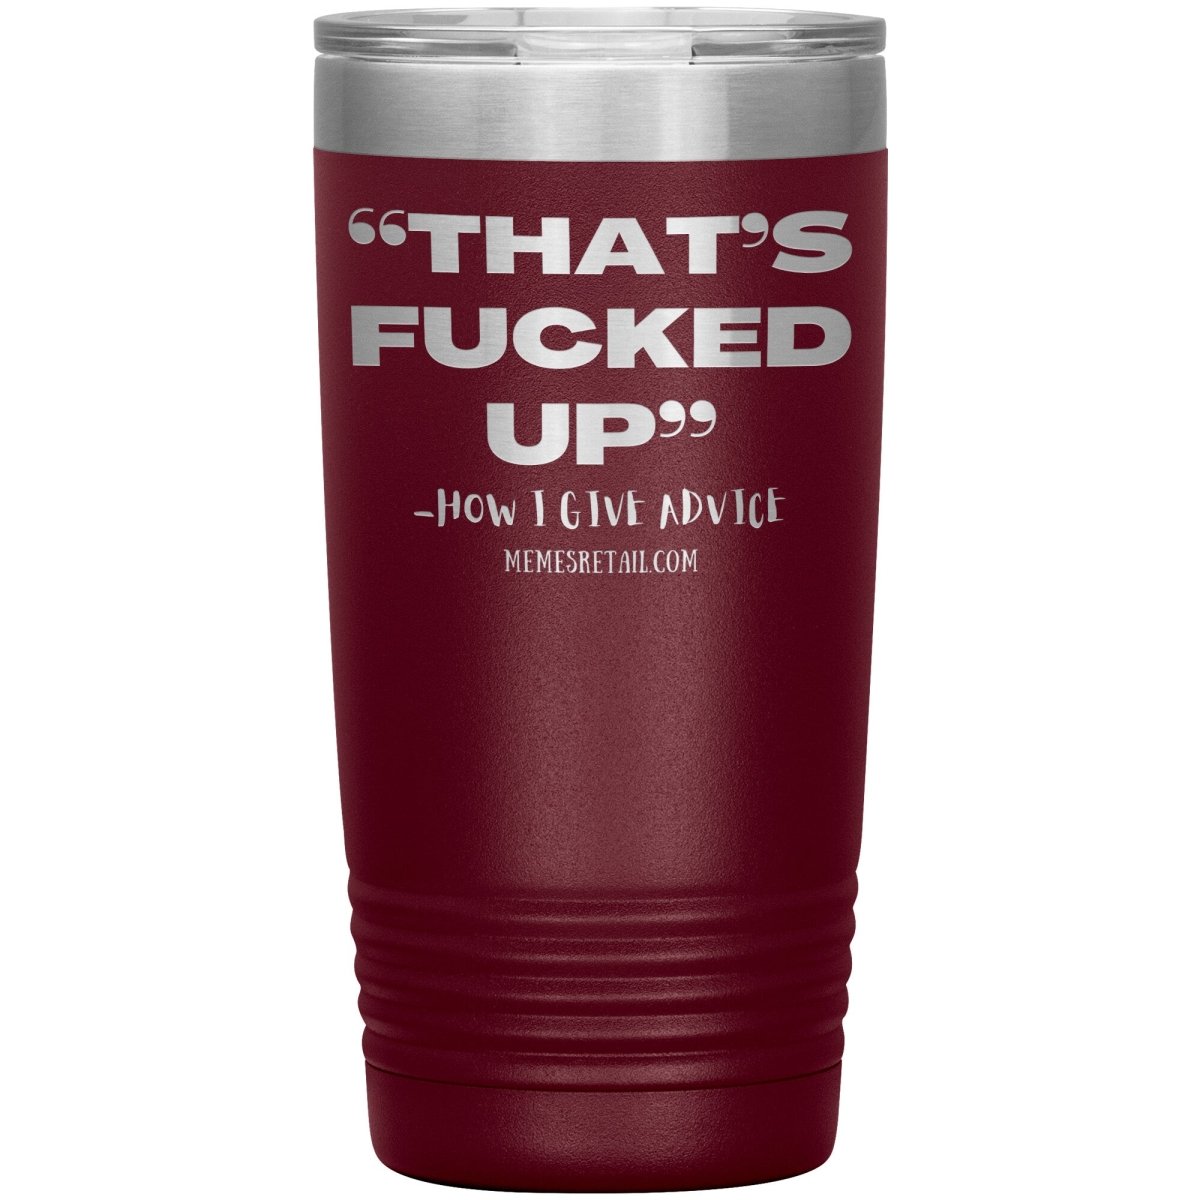 “That’s Fucked Up” -how I give advice Tumblers, 20oz Insulated Tumbler / Maroon - MemesRetail.com